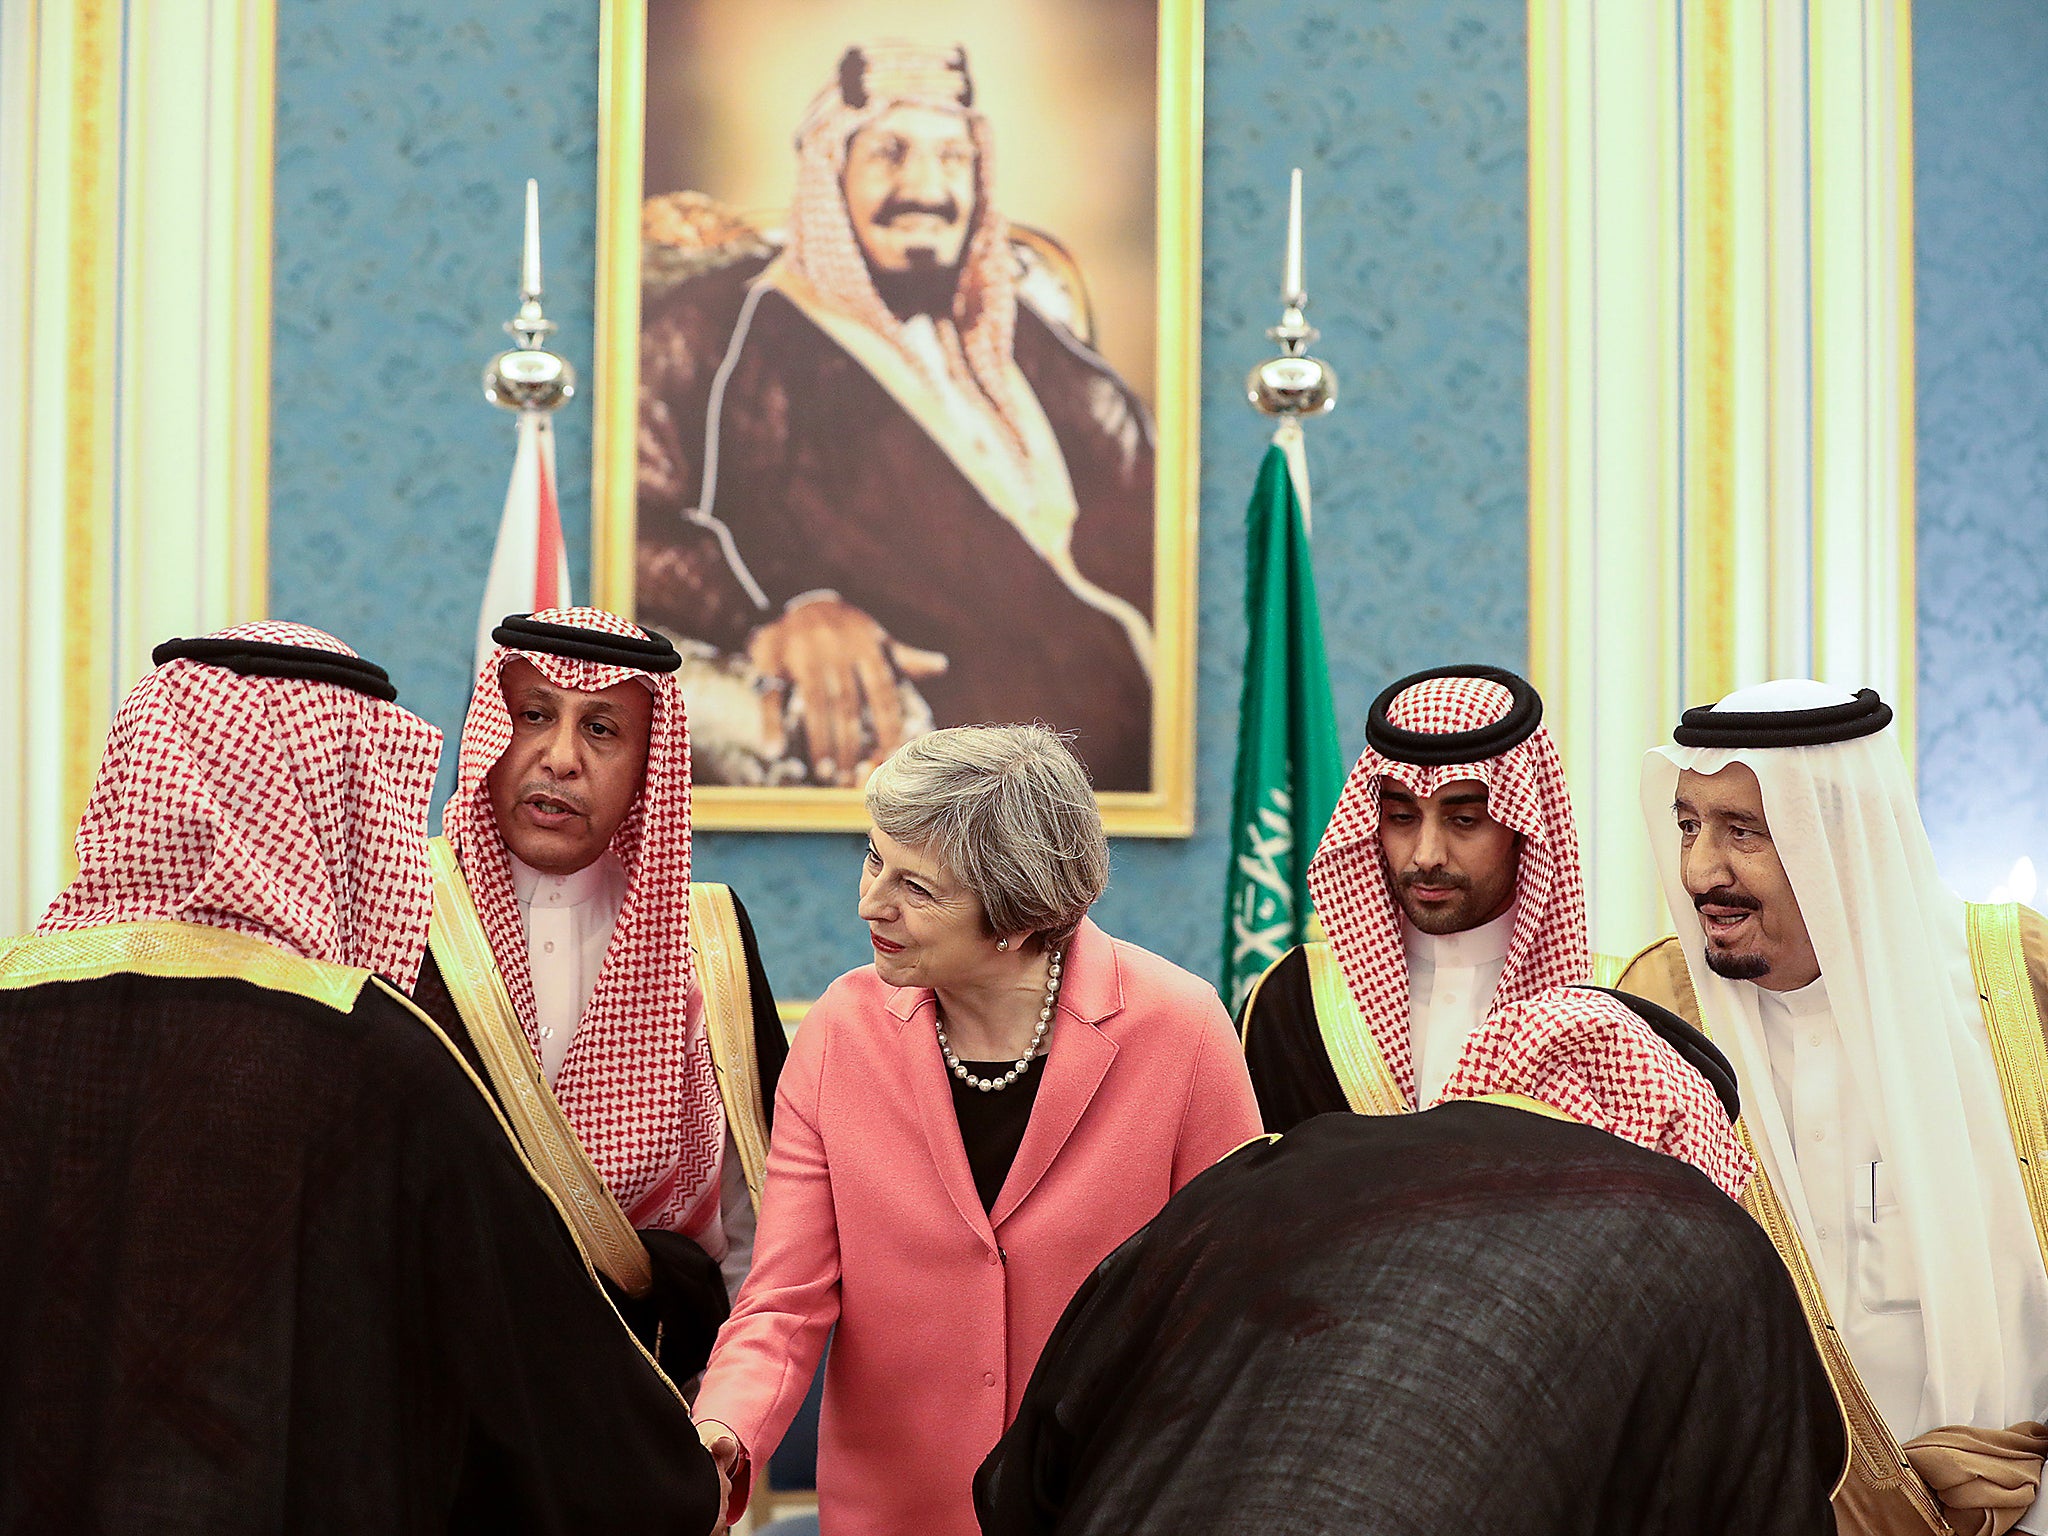 MPs and humanitarian groups have criticised the the PM’s recent Saudi visit due to the country’s human rights abuses, including in the war in Yemen, which has killed over 10,000 civilians